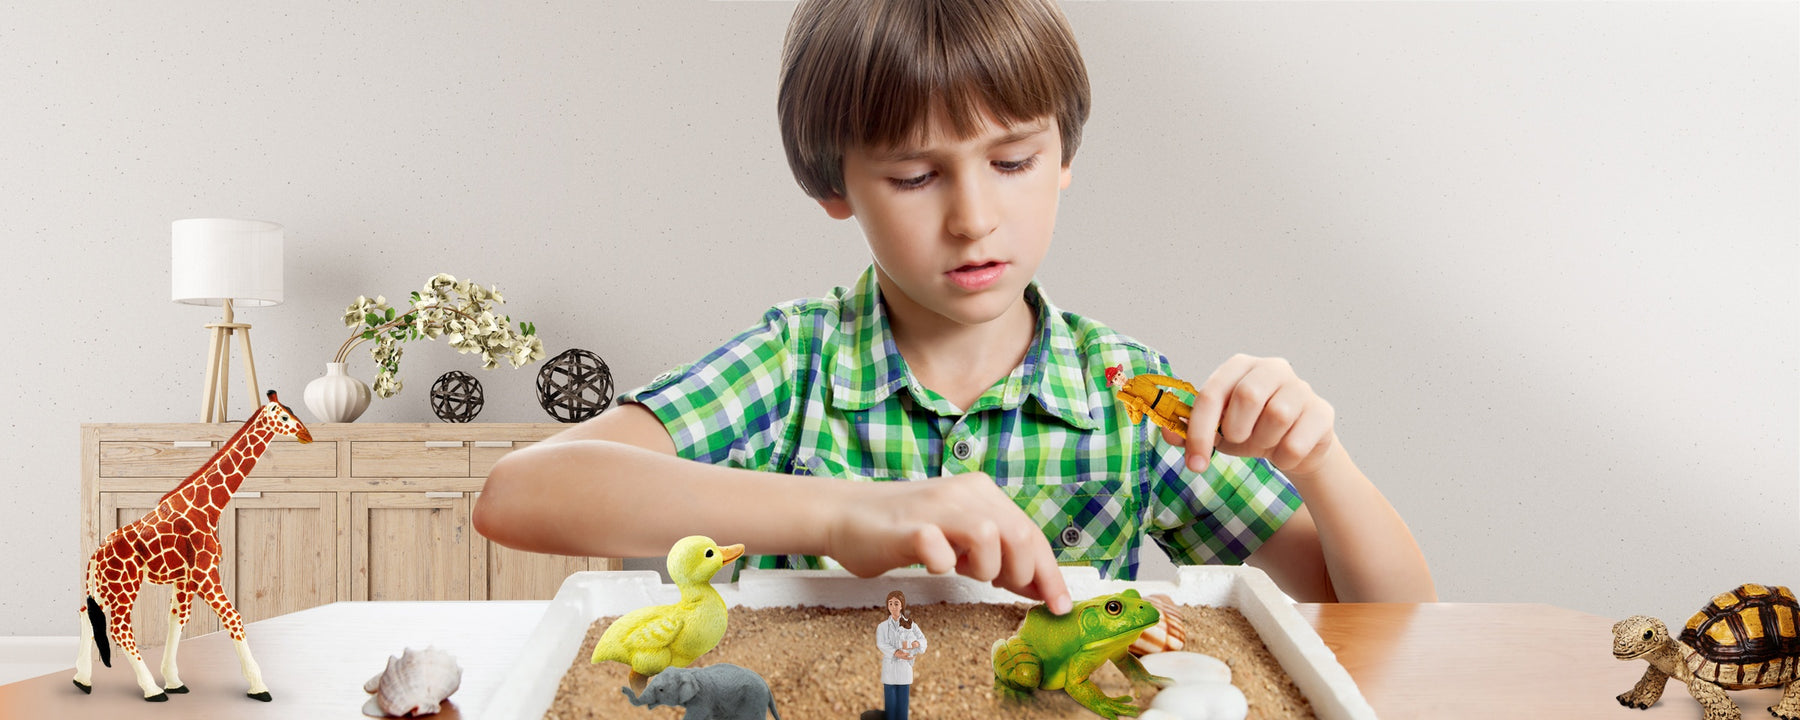 Break Your Child’s Language Barrier with Play Therapy Toys this Christmas - Safari Ltd®